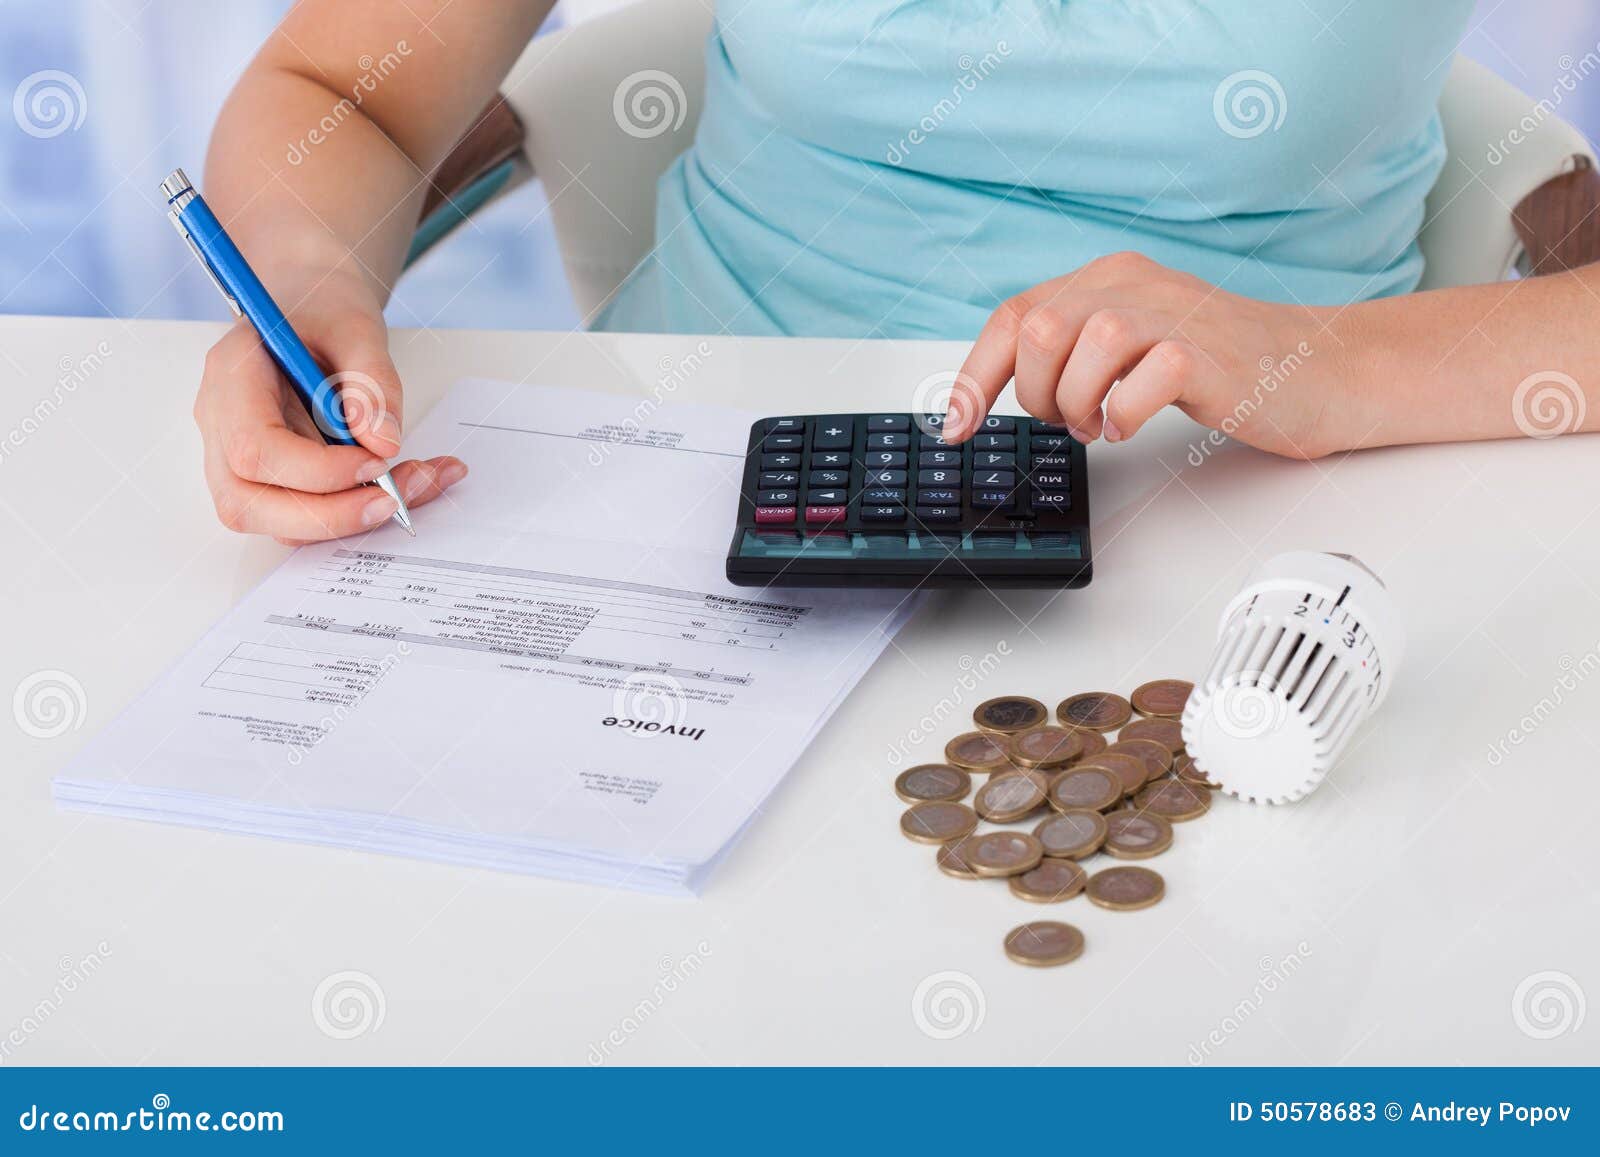 woman calculating invoice by coins and thermostat at desk